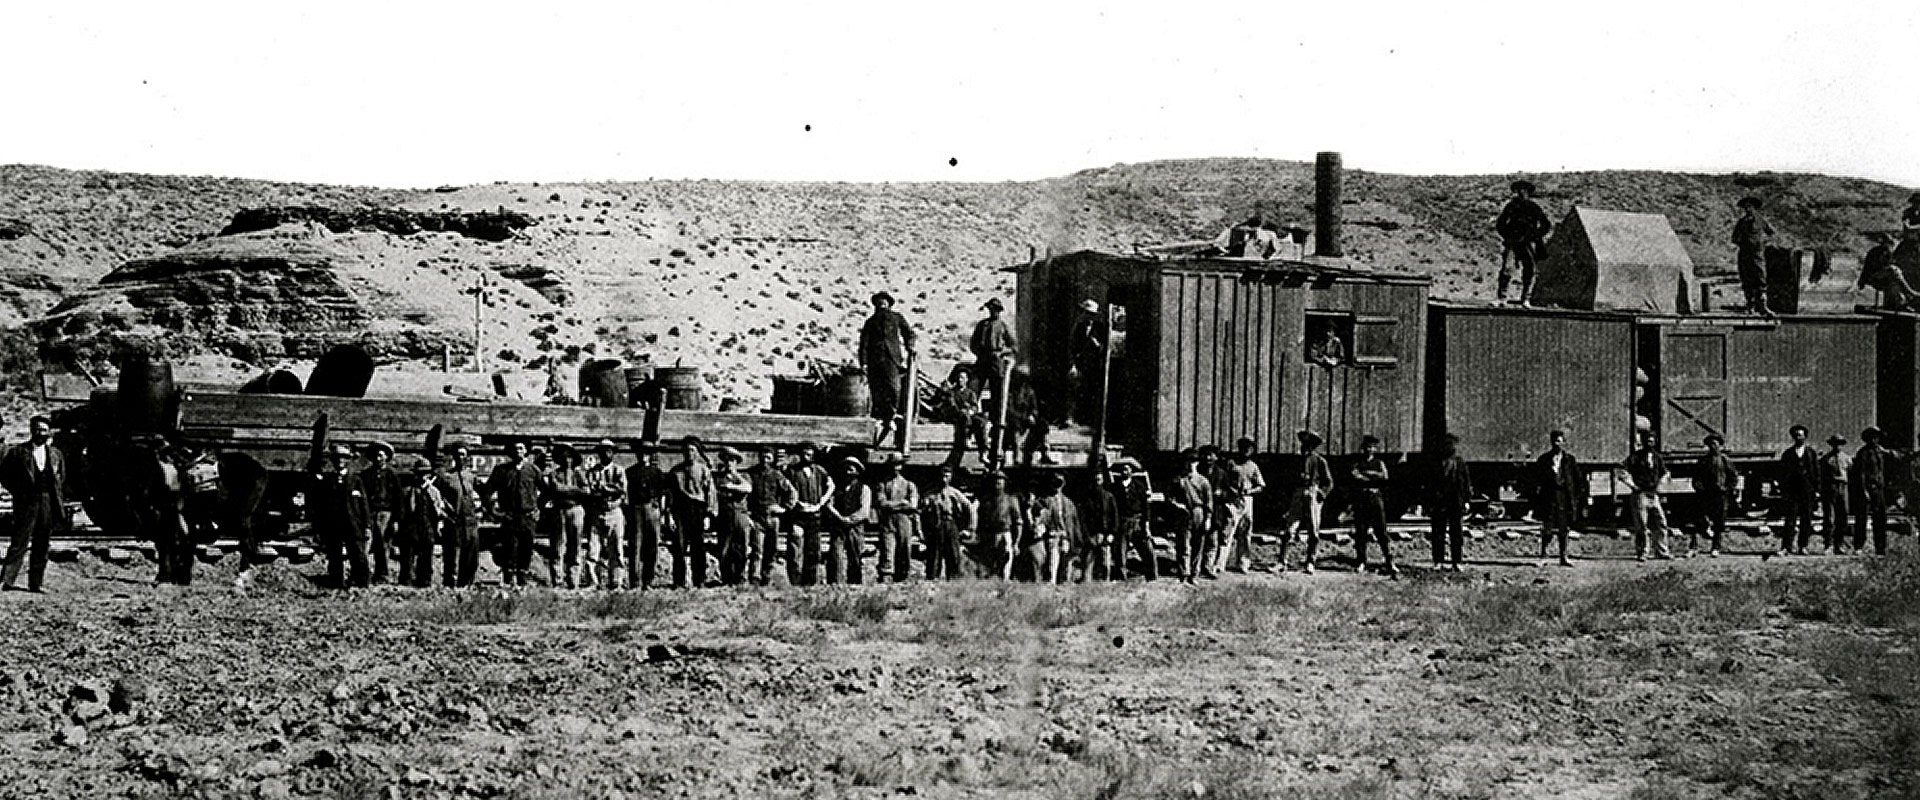 Train construction workers in Carbon County